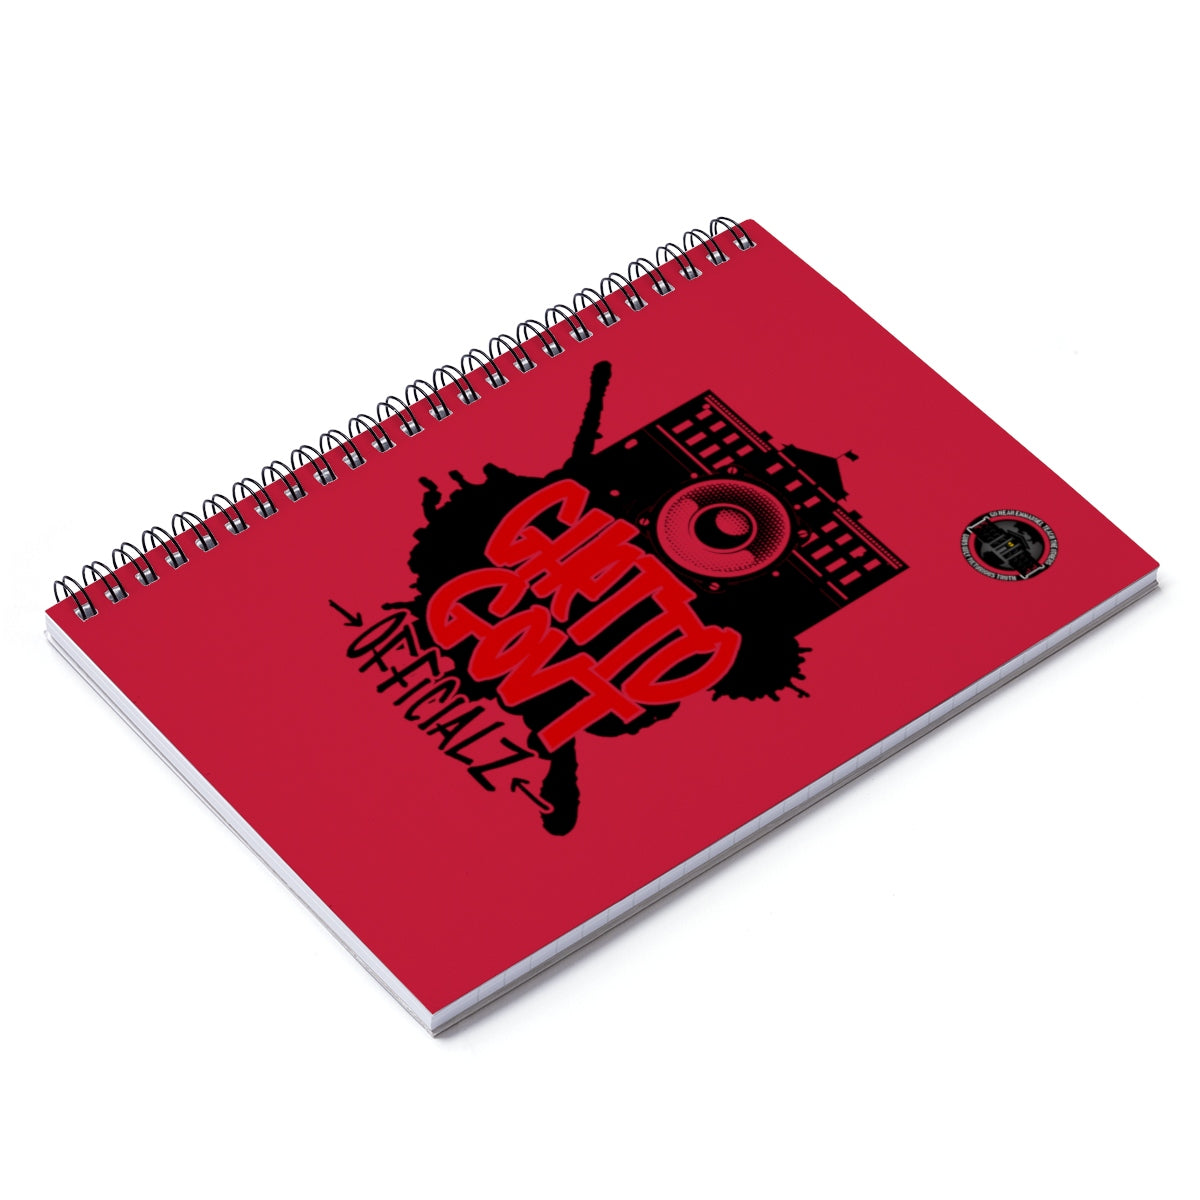 Ghetto Gov't Officialz Spiral Notebook - Ruled Line HeavenRazah - HellRazah Graphics by iHustle365